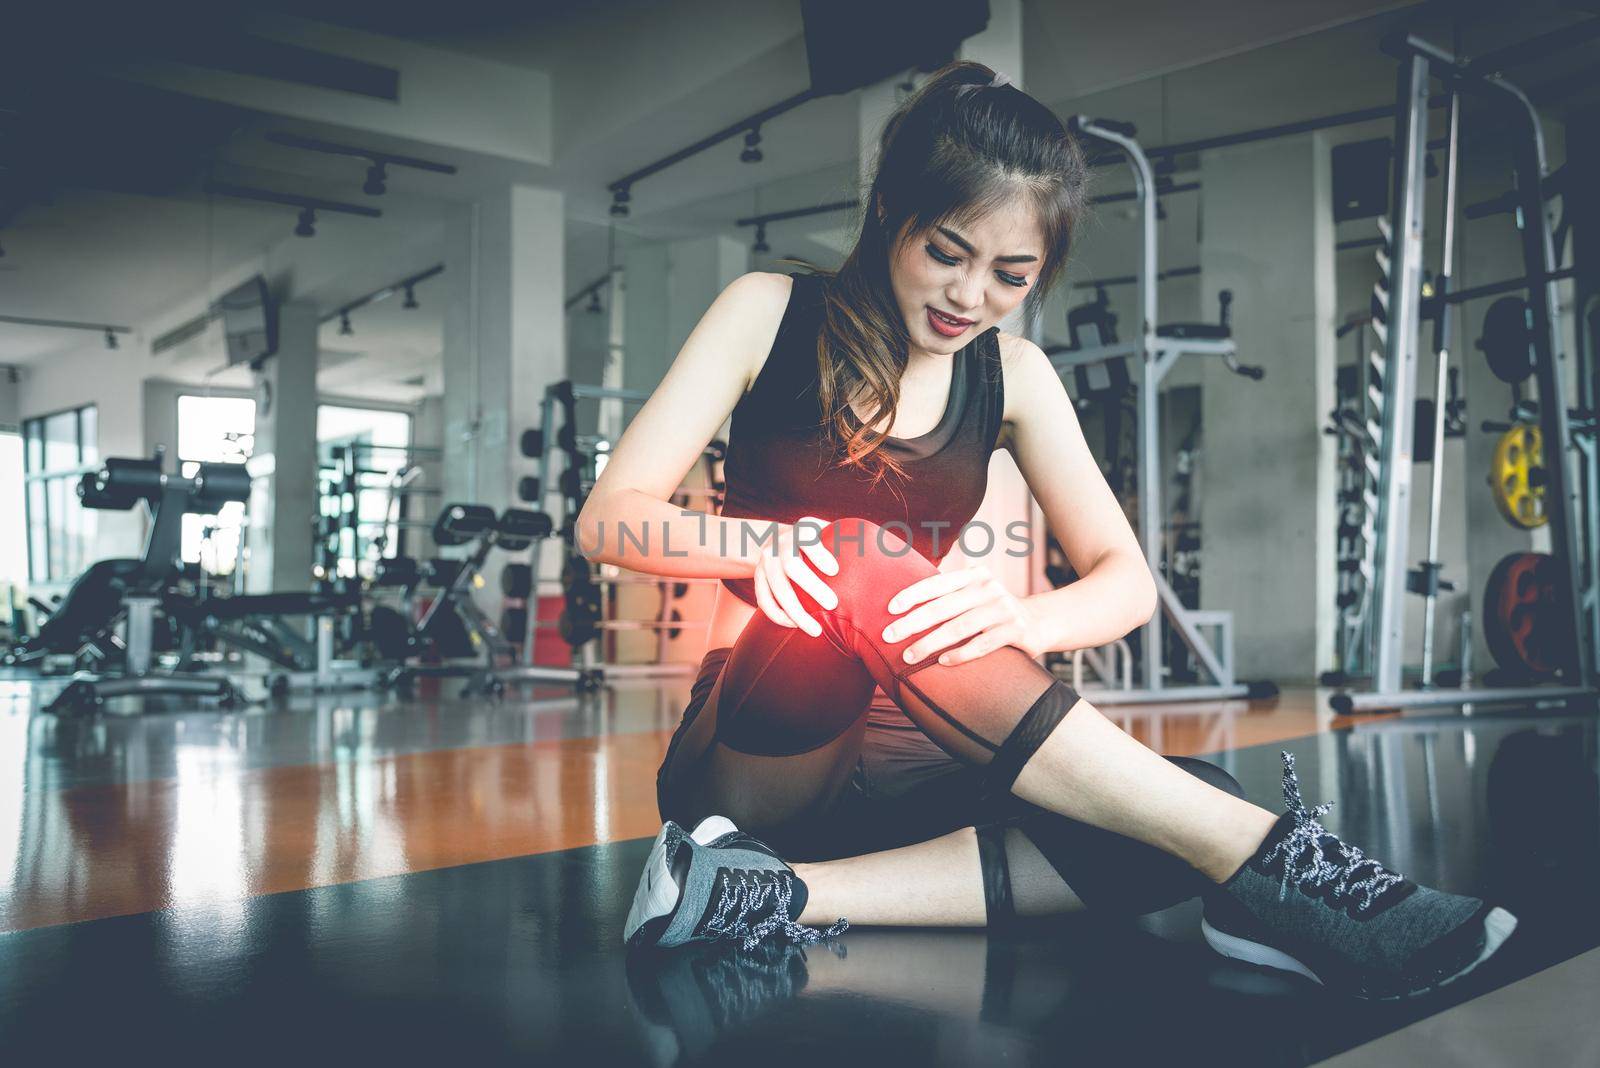 Asian woman injuries during workout at knee in fitness gym. Medical and Healthcare concept. Exercise and Training theme.  by MiniStocker